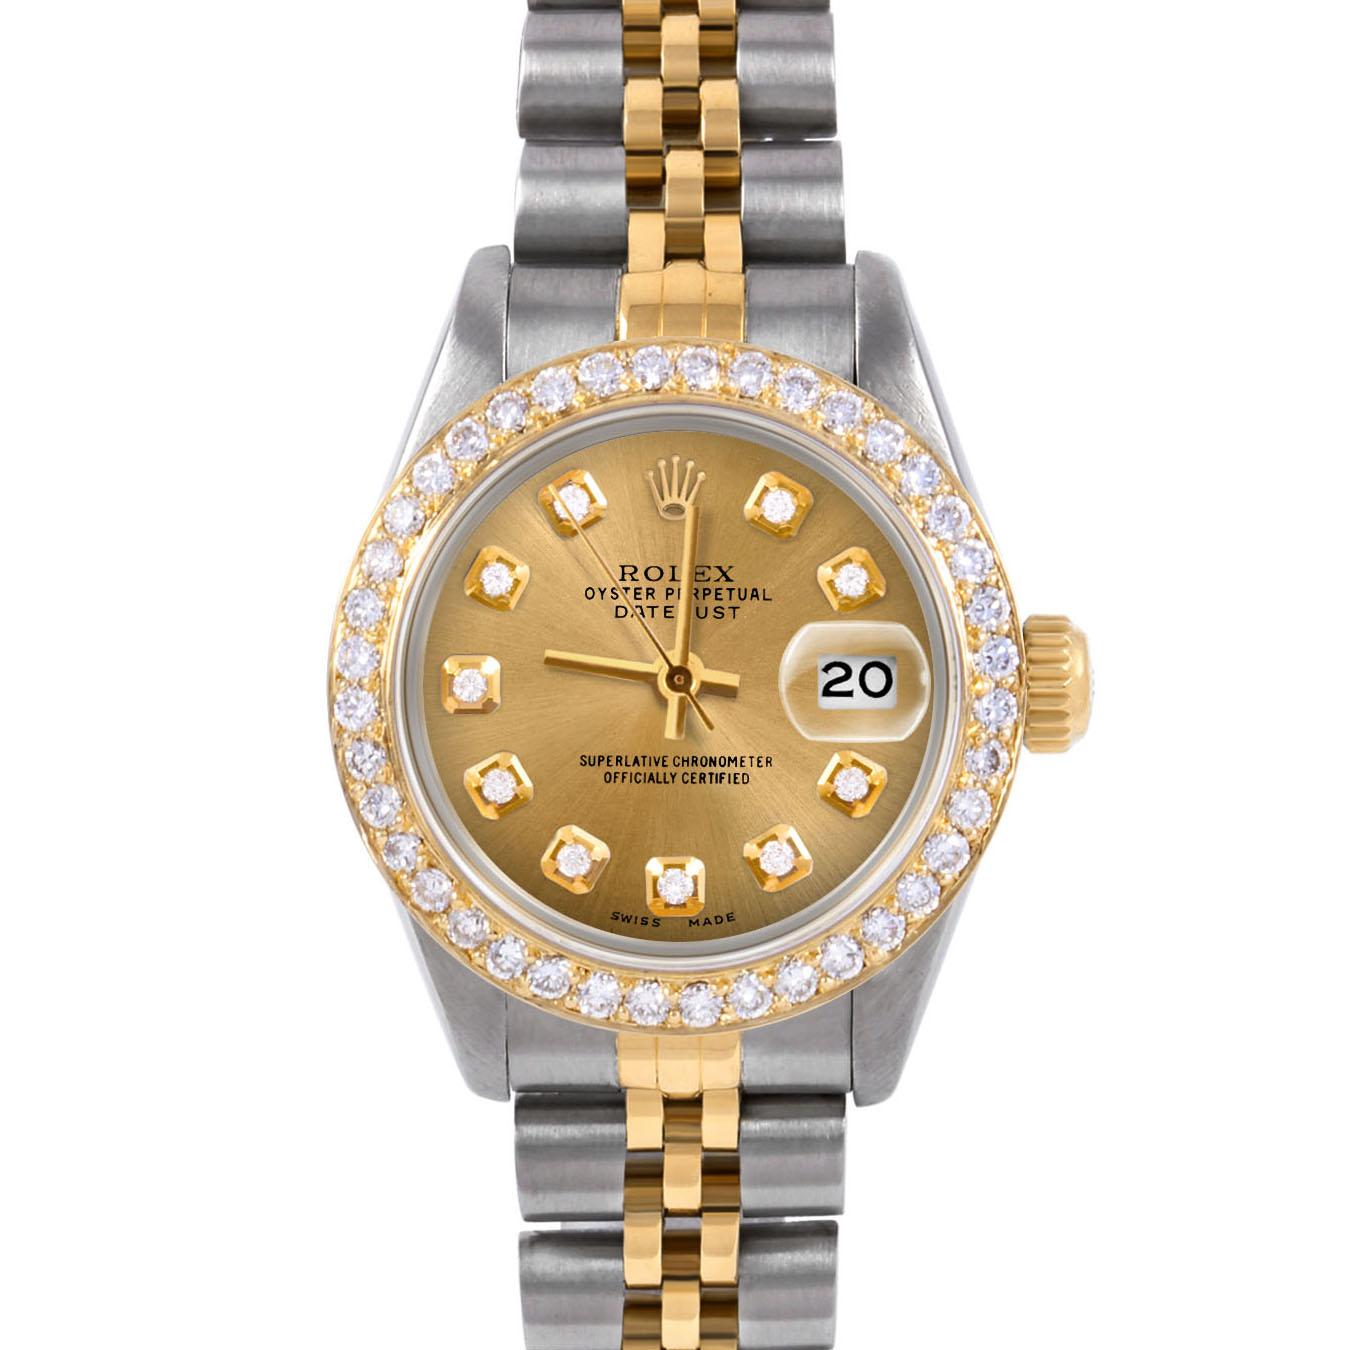 Swiss Wrist - SKU 6917-TT-CHM-DIA-AM-BDS-JBL

Brand : Rolex
Model : Datejust (Non-Quickset Model)
Gender : Ladies
Metals : 14K/Stainless Steel
Case Size : 26 mm

Dial : Custom Champagne Diamond Dial (This dial is not original Rolex And has been